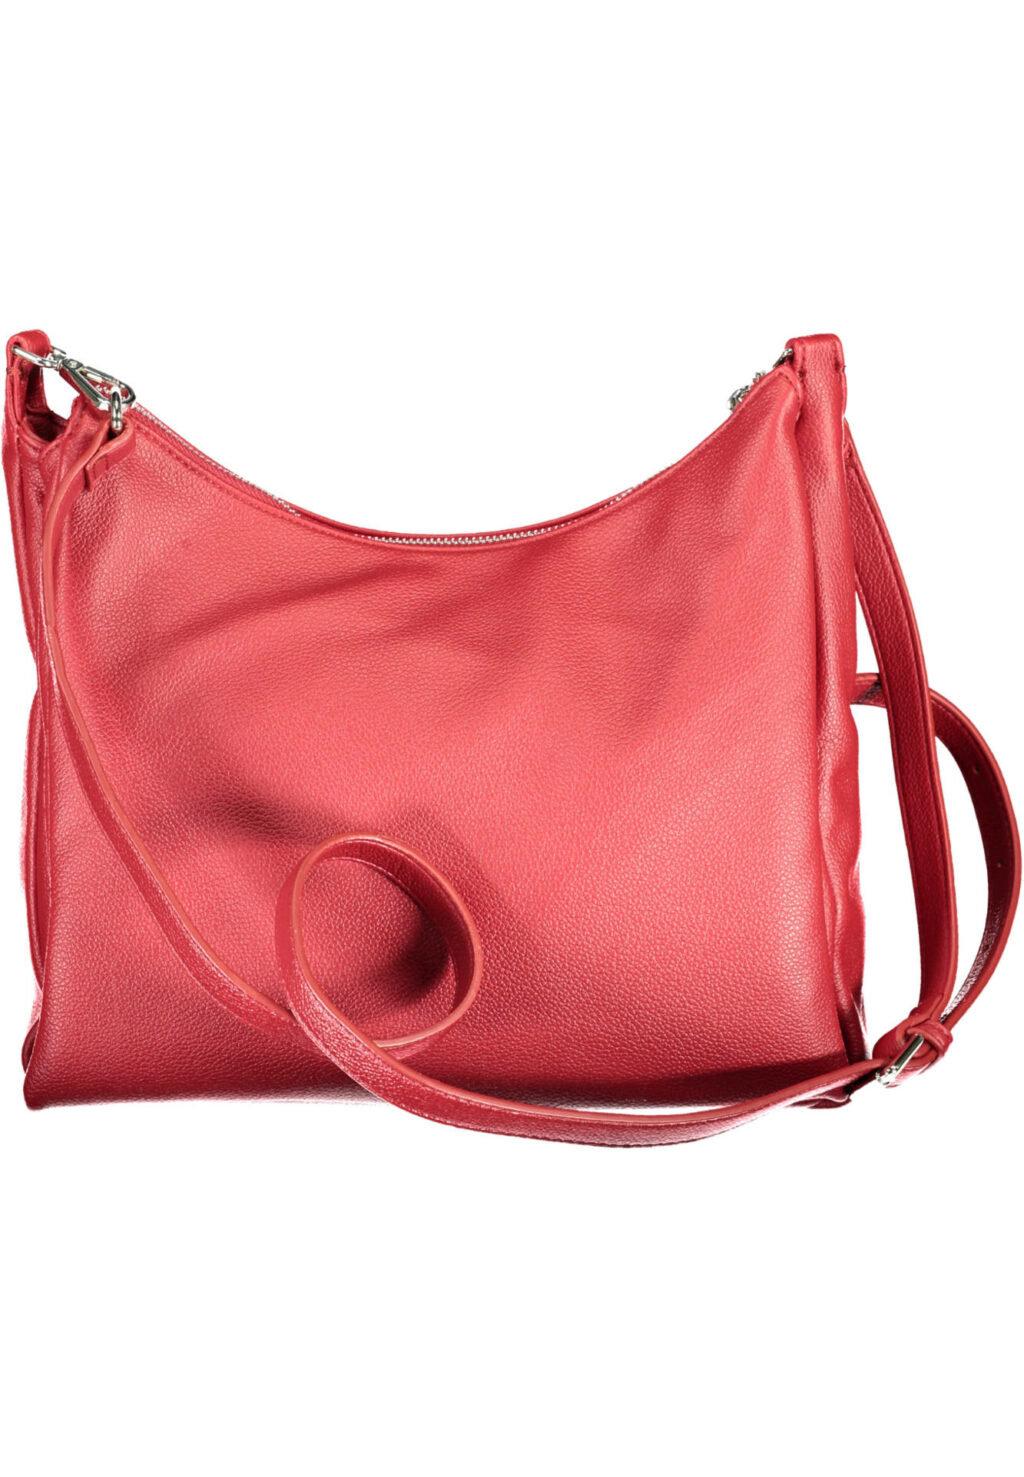 BYBLOS RED WOMEN'S BAG 20100087_ROSSO_333-RED